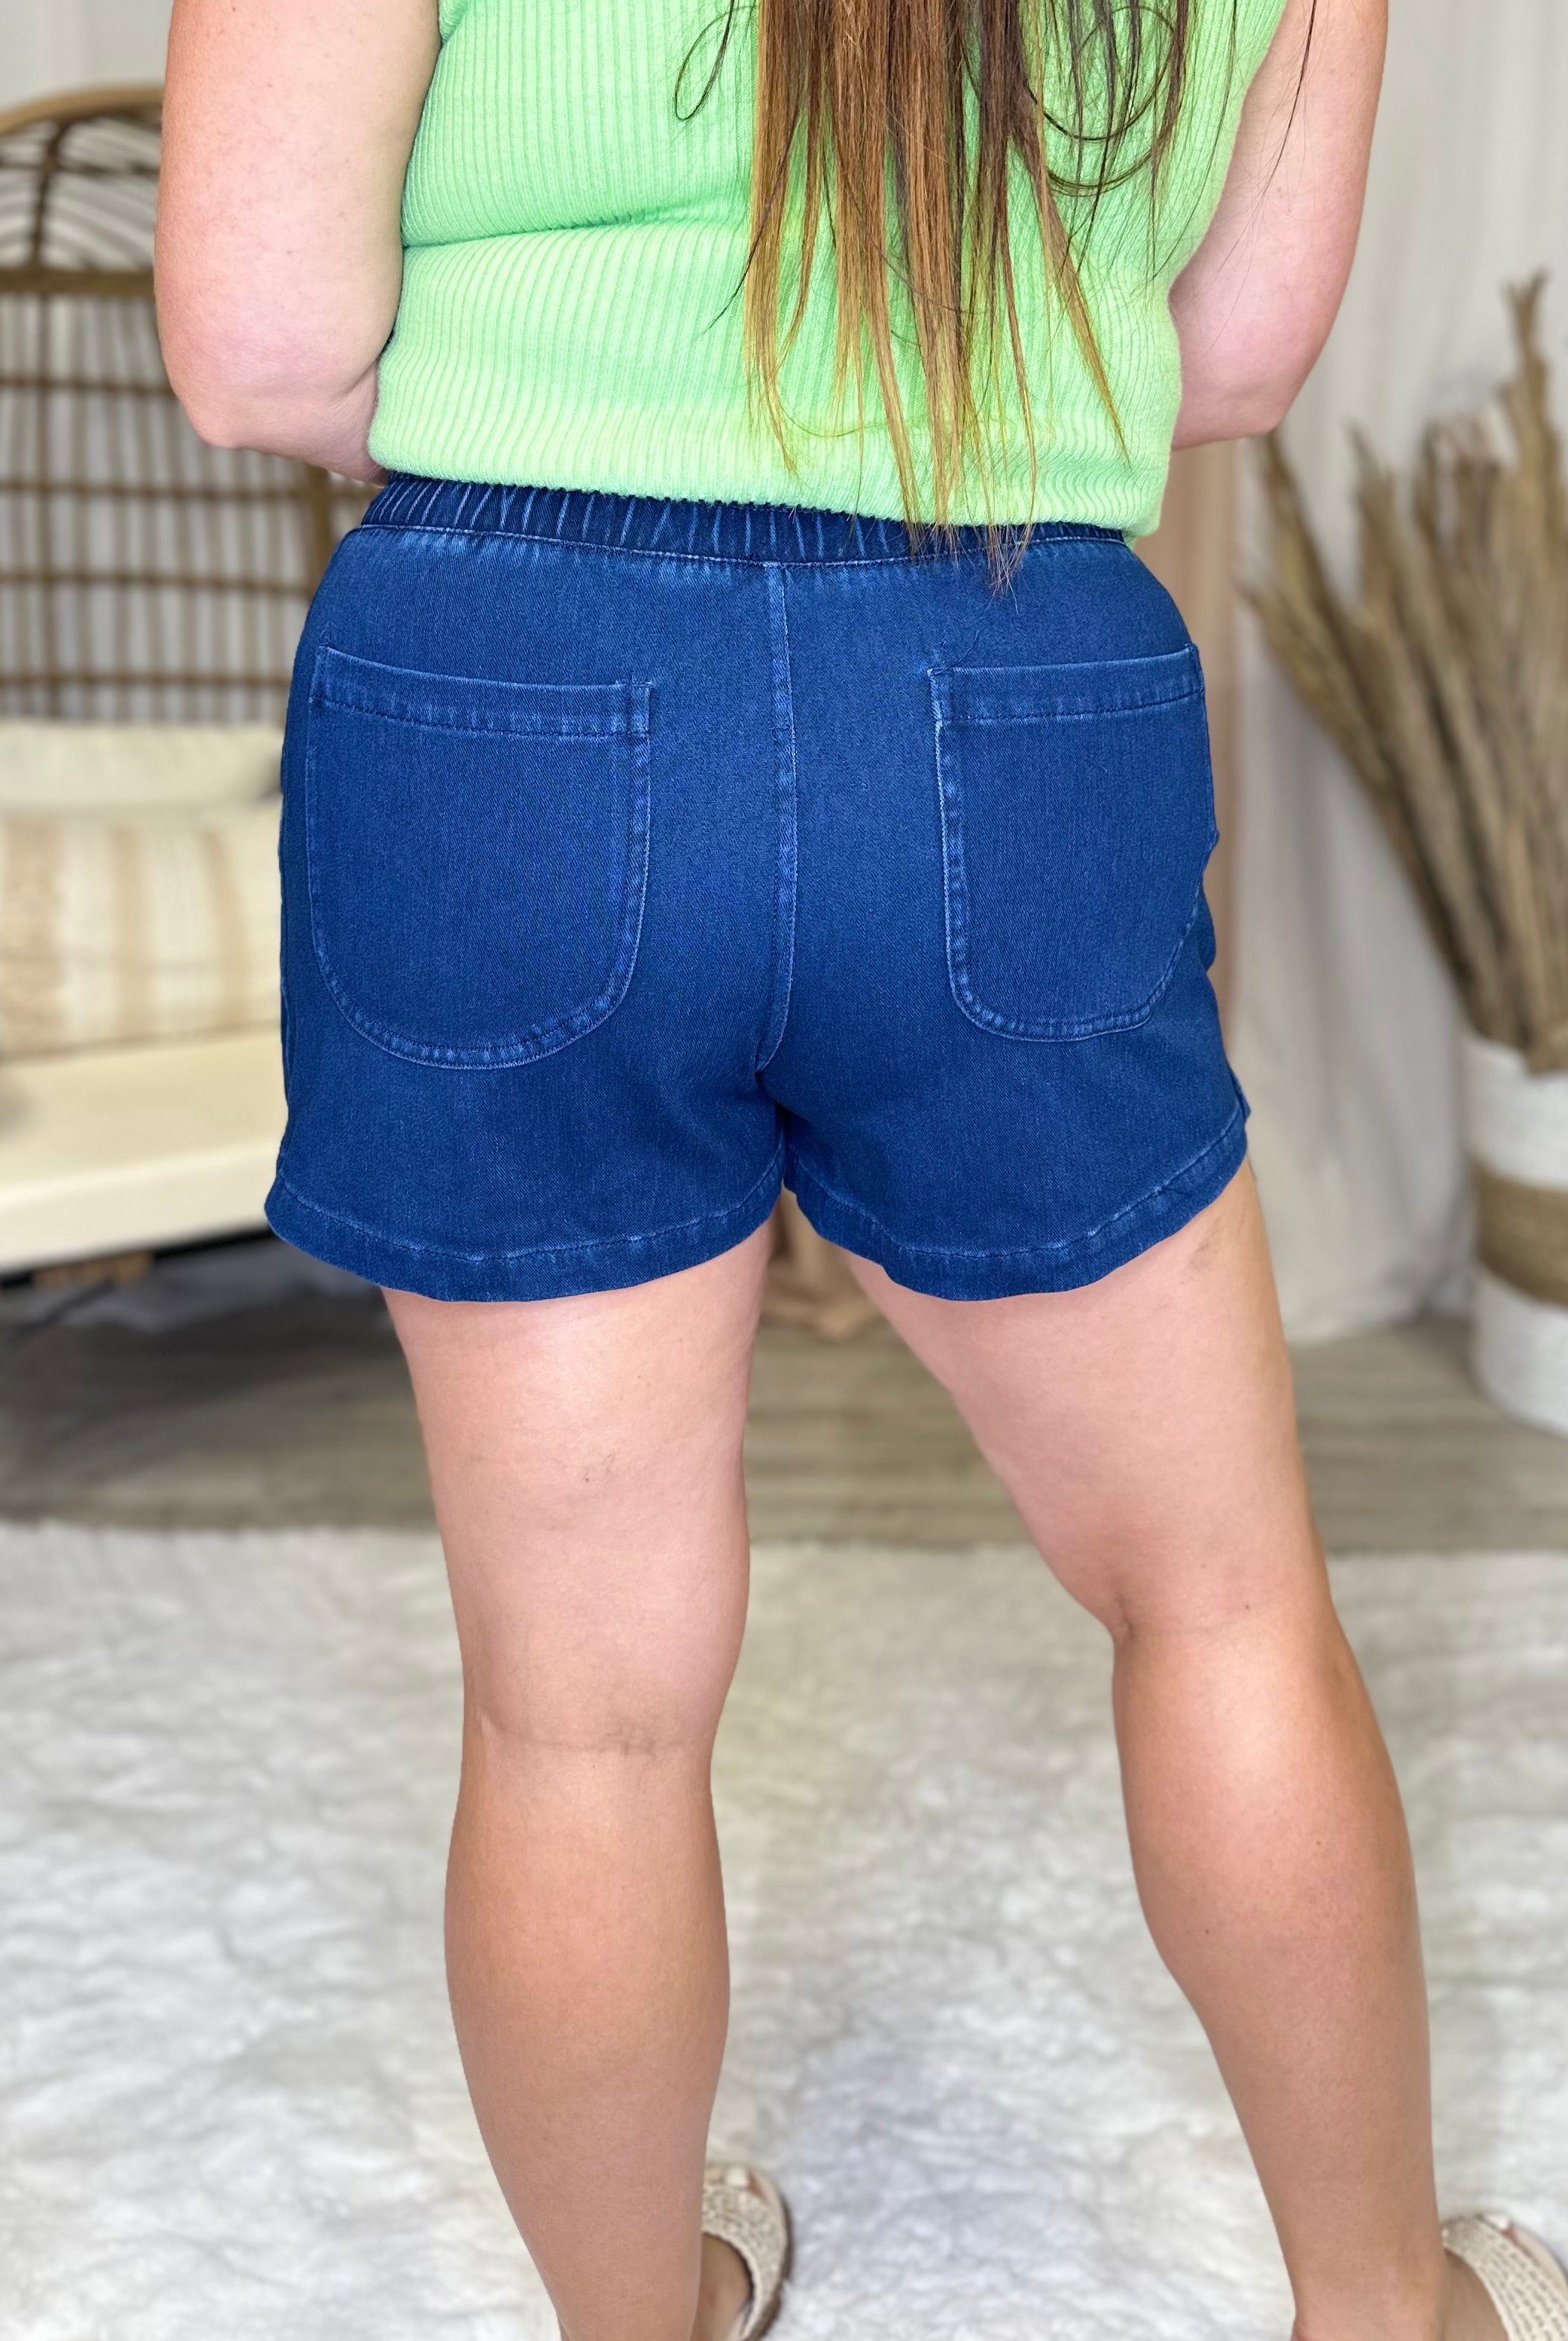 Bring the Good Vibes Skort-170 Skort/ Skirt-Rae Mode-Heathered Boho Boutique, Women's Fashion and Accessories in Palmetto, FL